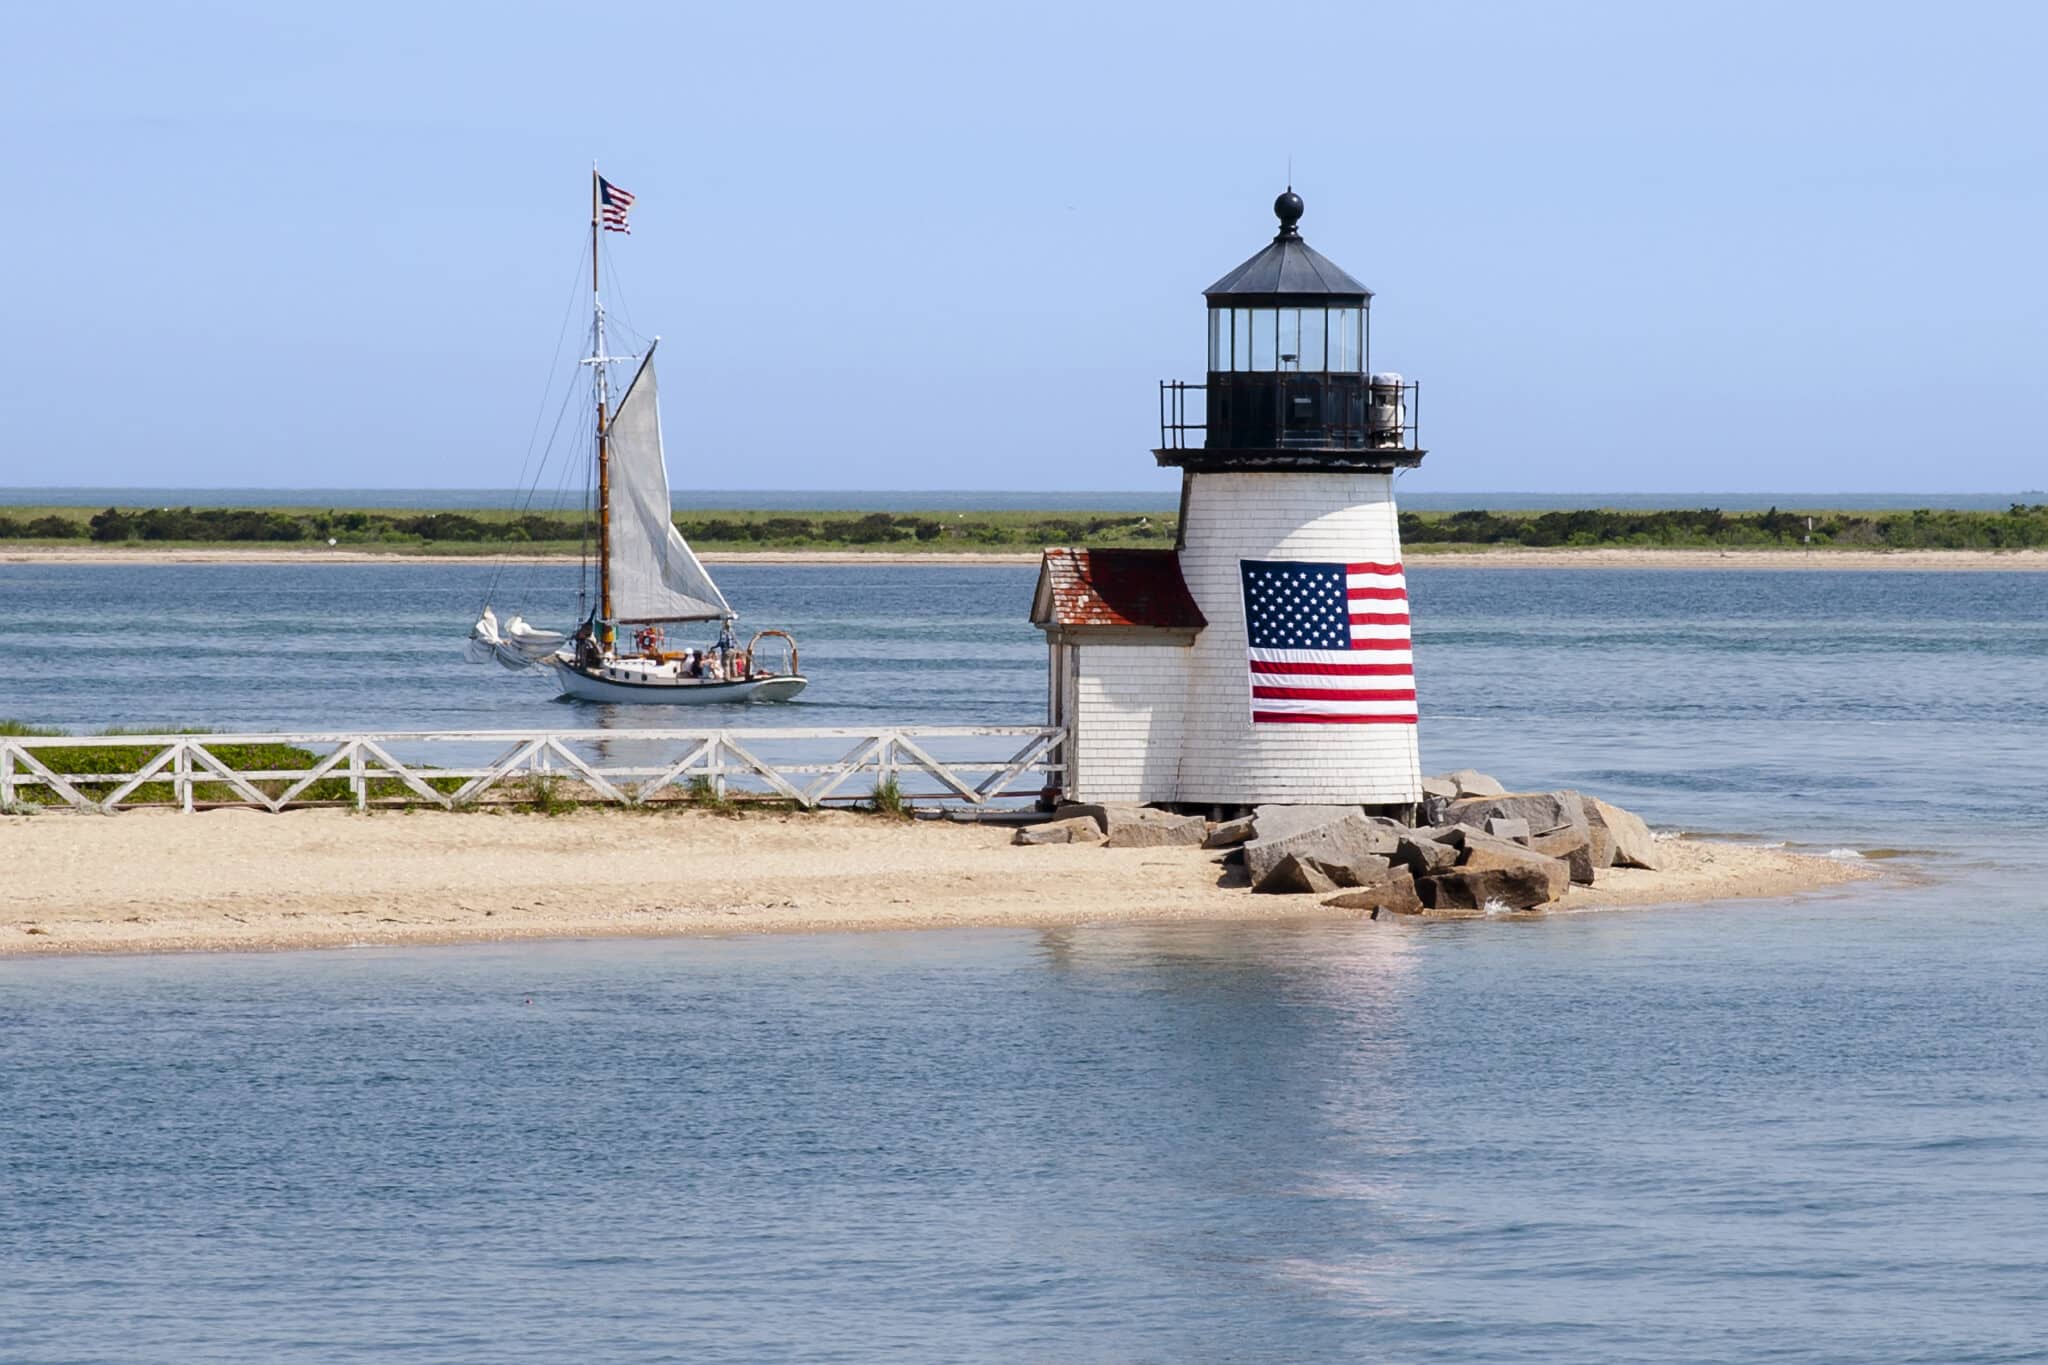 Summer on Nantucket: 3 Must-See Attractions